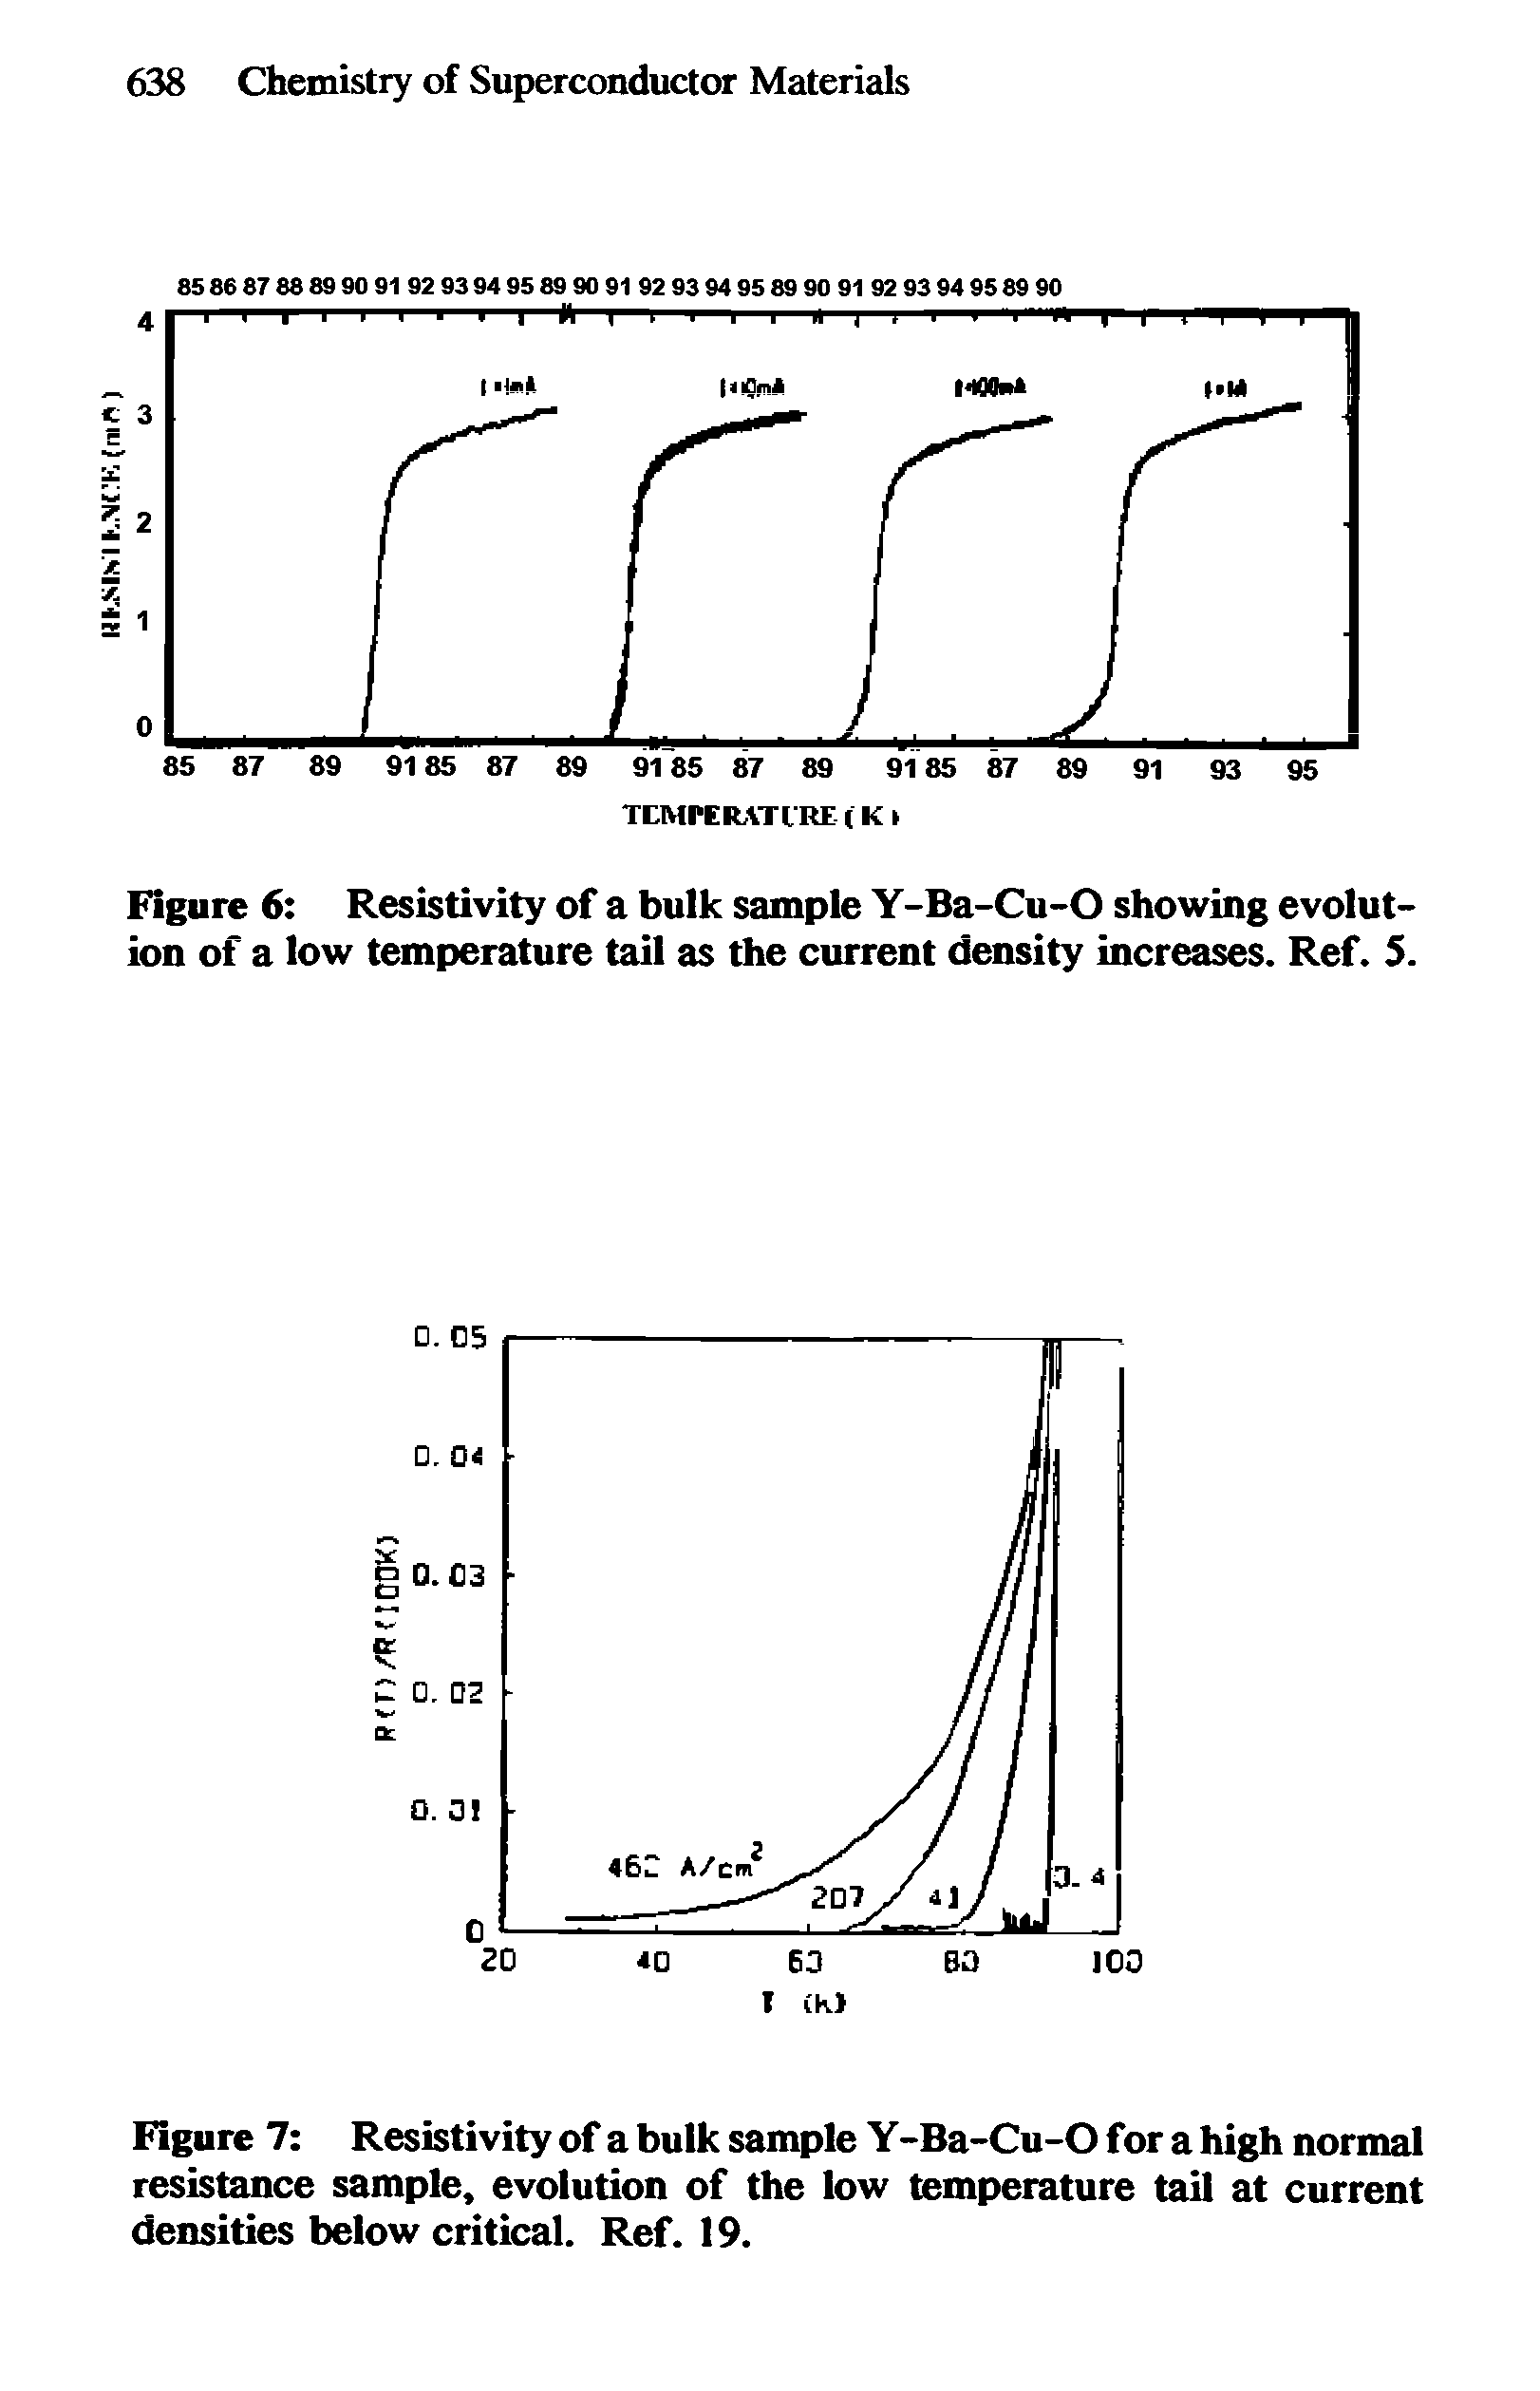 Figure 7 Resistivity of a bulk sample Y-Ba-Cu-O for a high normal resistance sample, evolution of the low temperature tail at current densities below critical. Ref. 19.